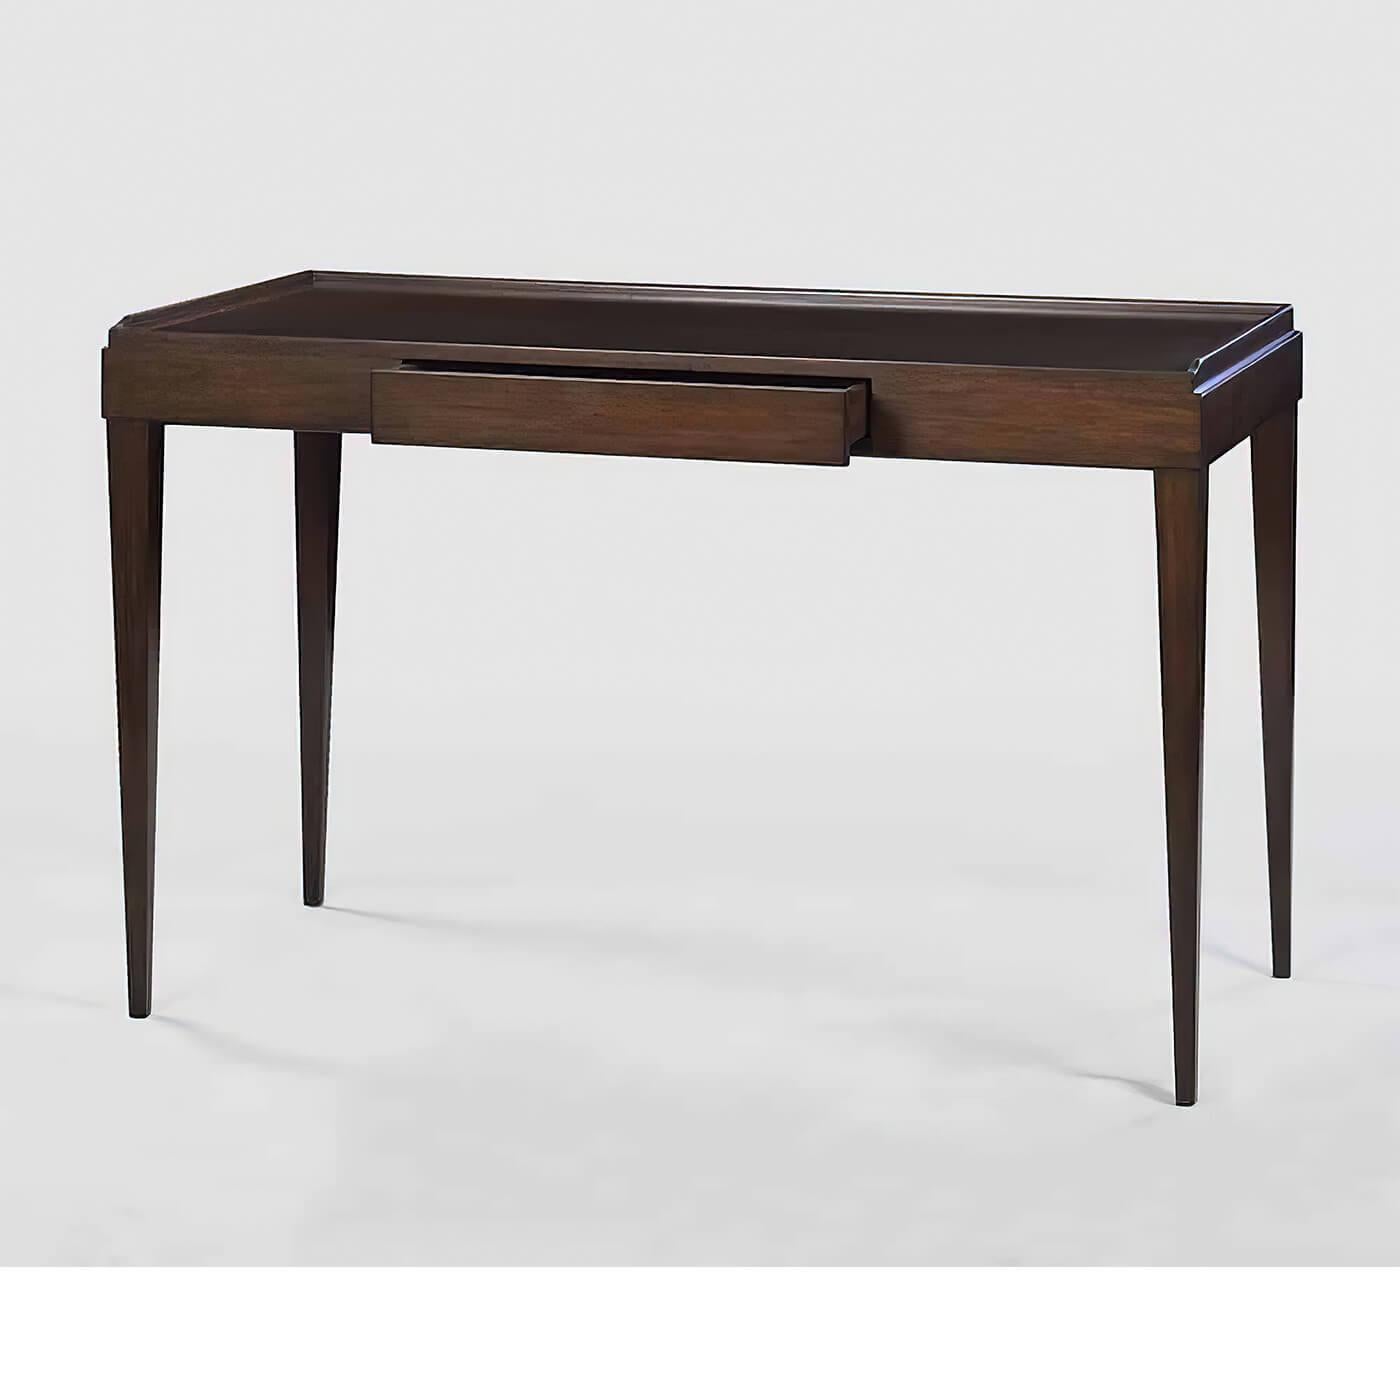 Mid-Century Modern style desk with a three-quarter wooden gallery, a single frieze drawer, and raised on square tapered legs. Finished in our dark mahogany stain.

Dimensions: 48